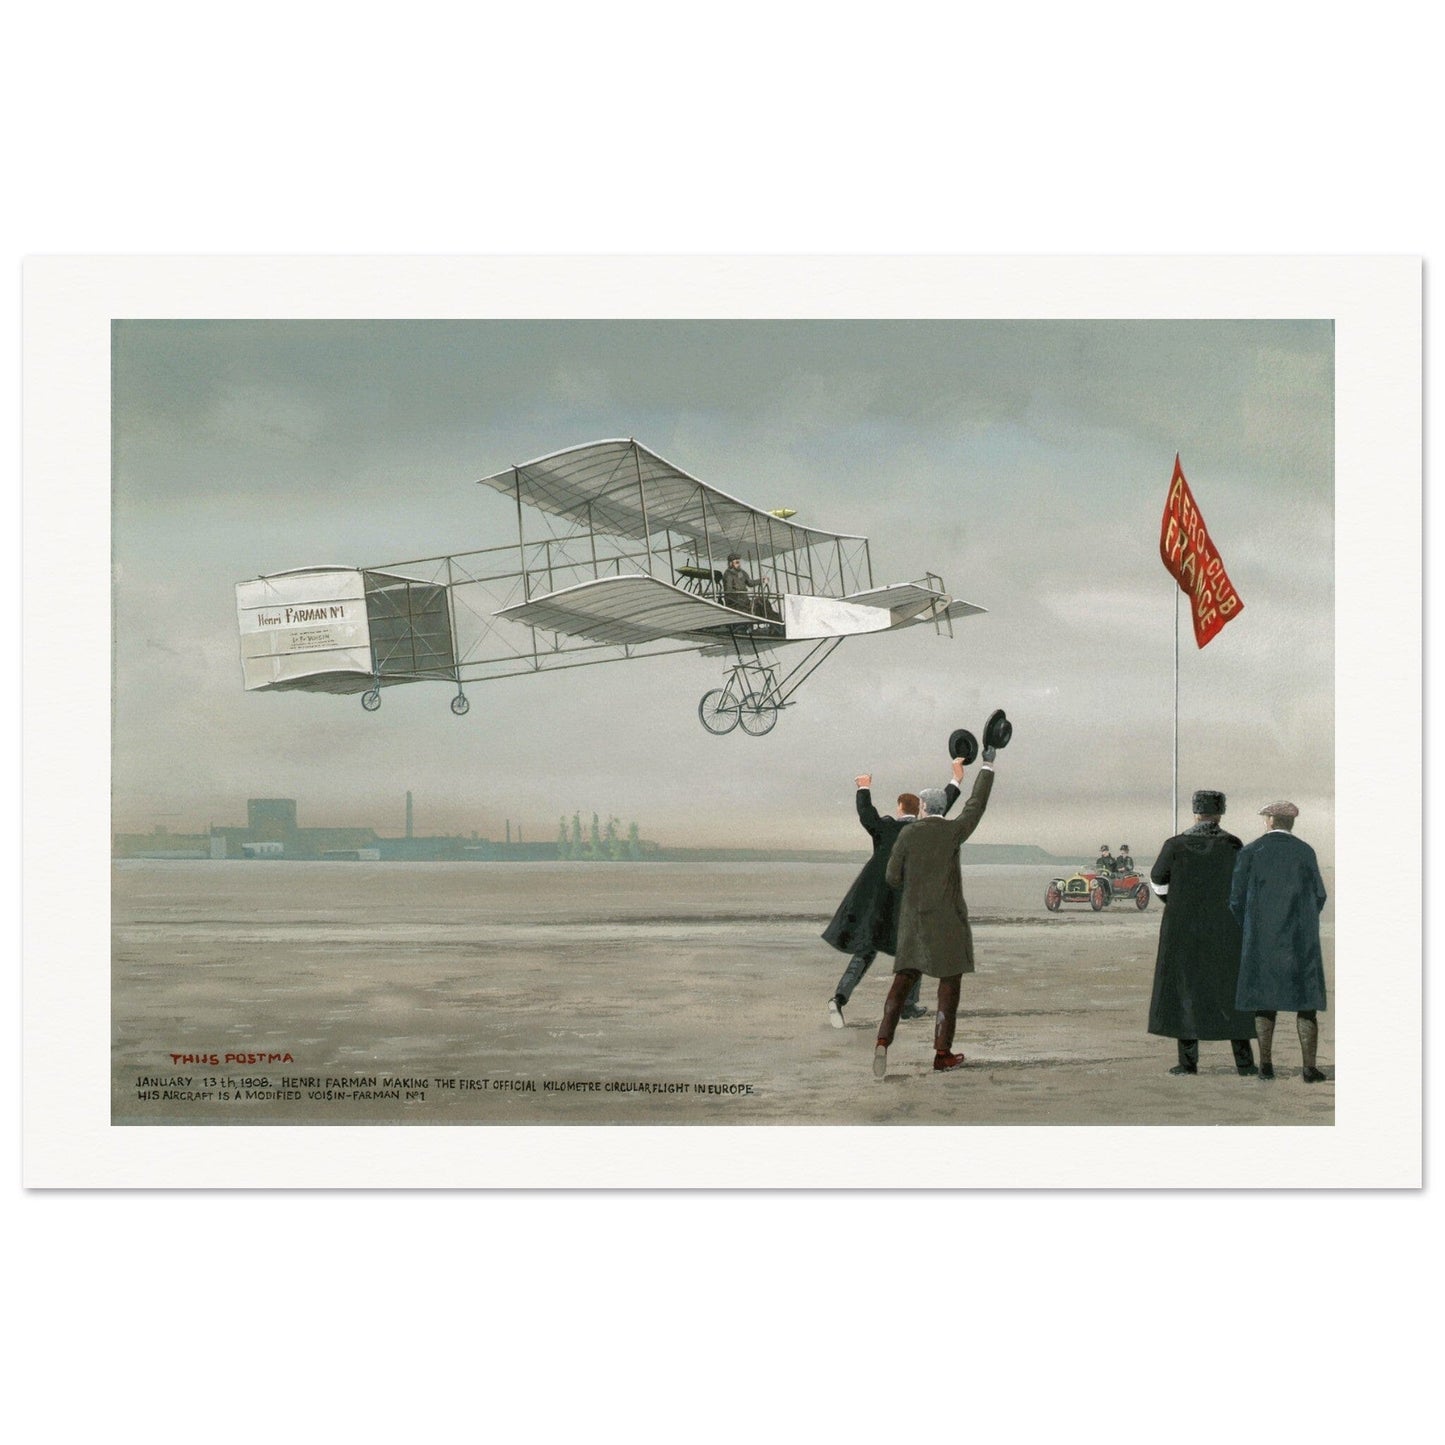 Thijs Postma - Poster - Farman No.1 First Flight Of One Kilometer Over Europe Poster Only TP Aviation Art 60x90 cm / 24x36″ 